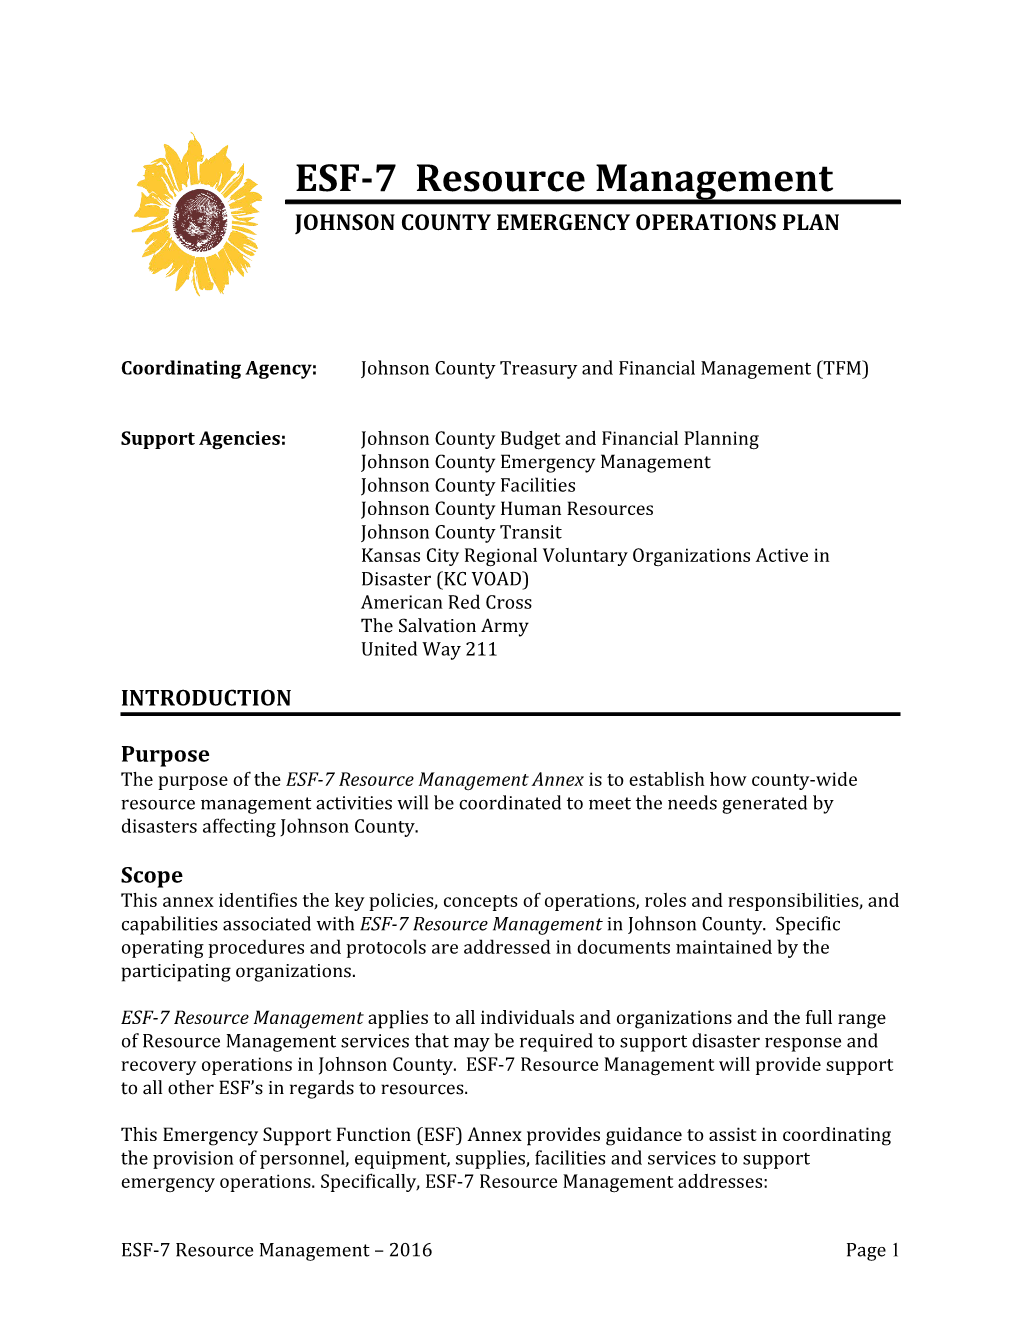 Coordinating Agency: Johnson County Treasury and Financial Management (TFM)